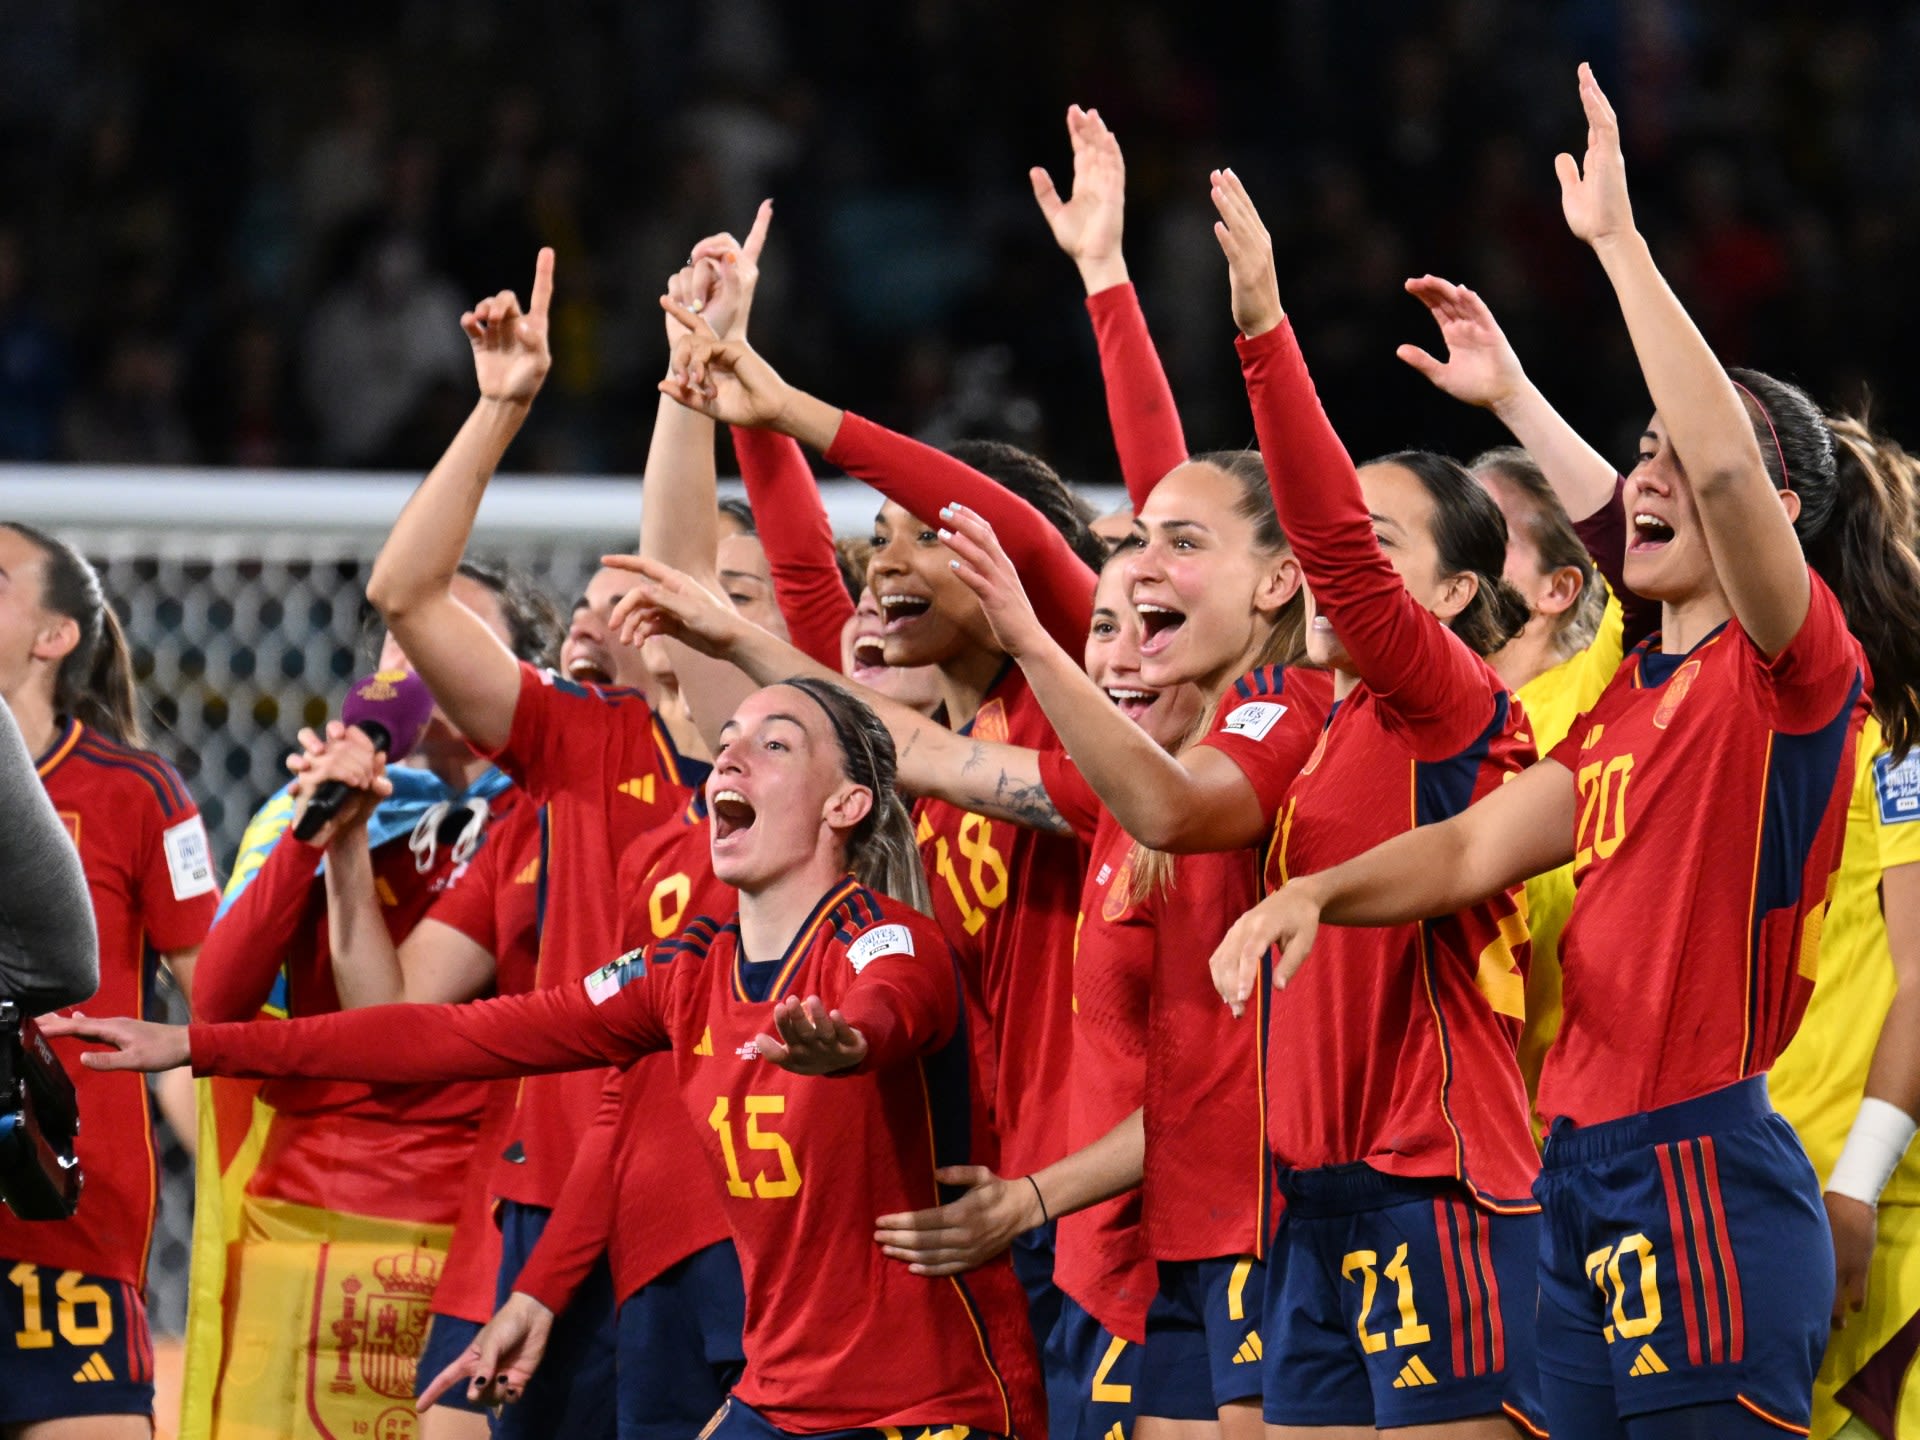 All to know about the women’s football tournament at Paris Olympics 2024